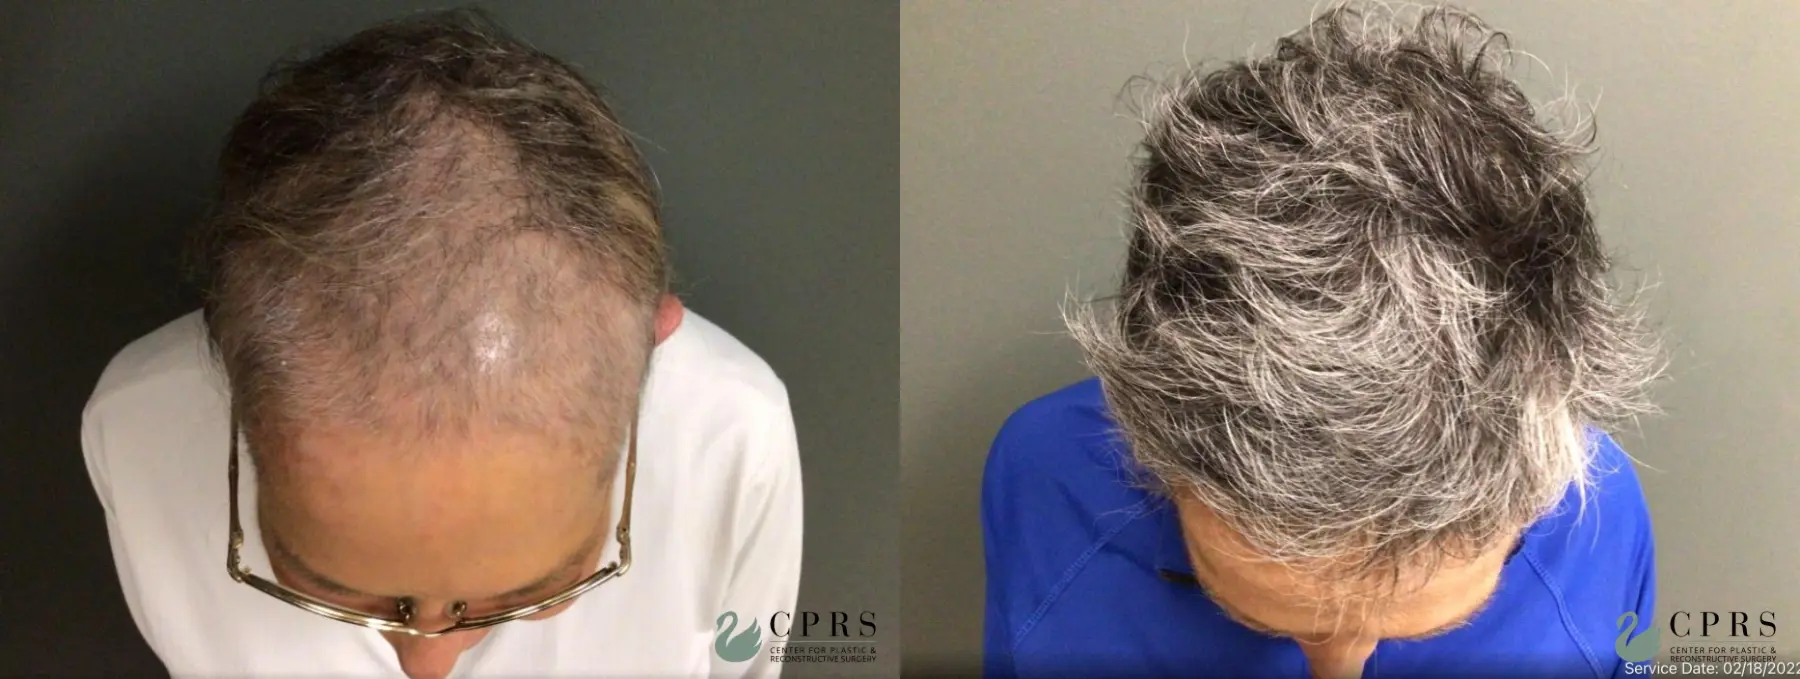 PRP Hair Restoration : Patient 1 - Before and After  